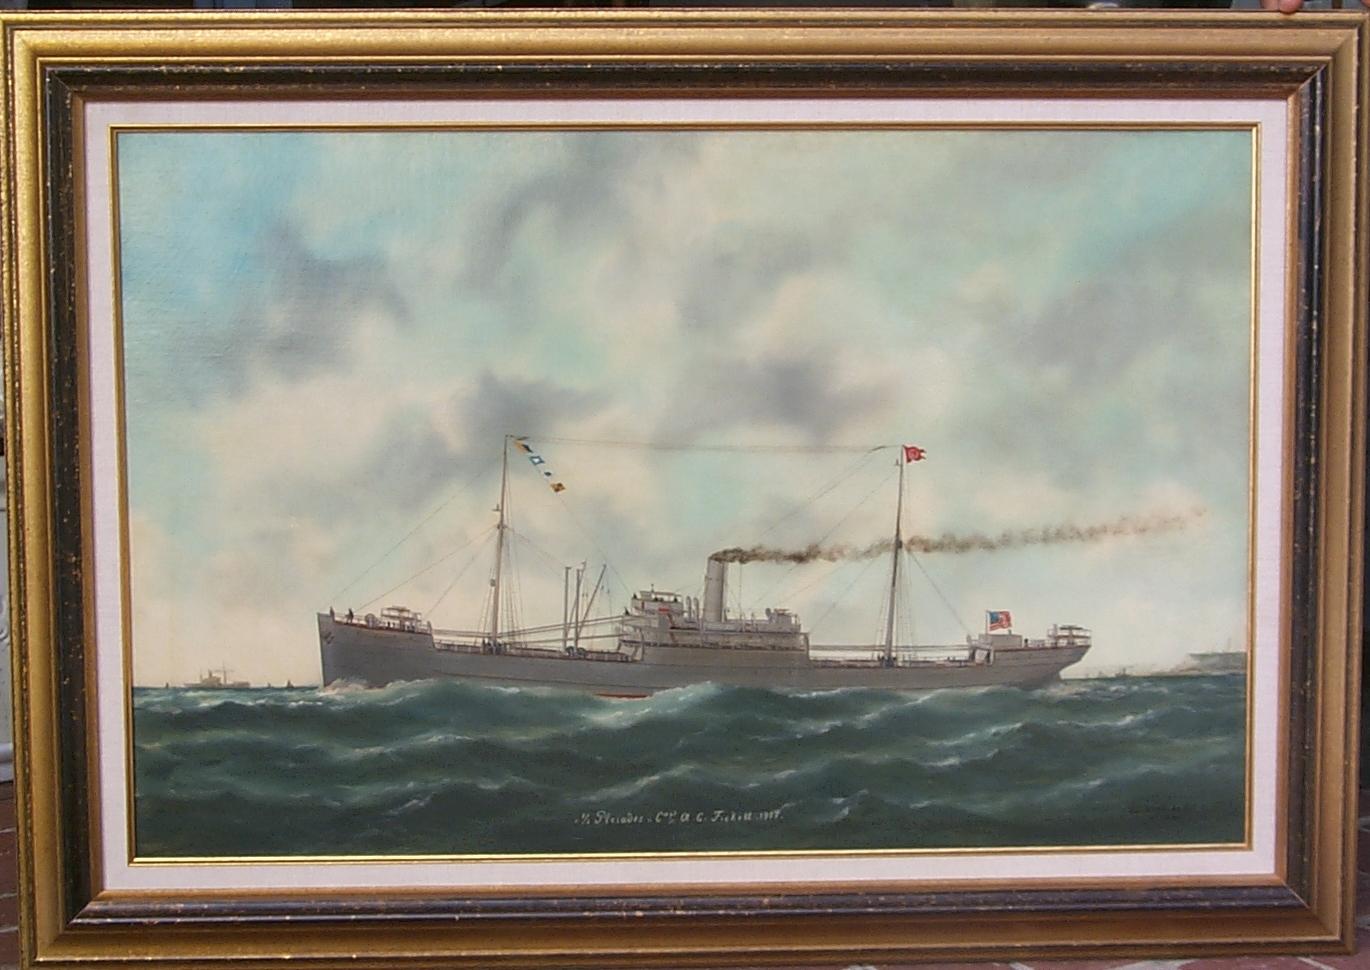 American Merchant Ship S.S. PLEIADES, Later WWI US Navy Ship USS PLEIADES - Other Art Style Painting by Edouard Adam Jr.